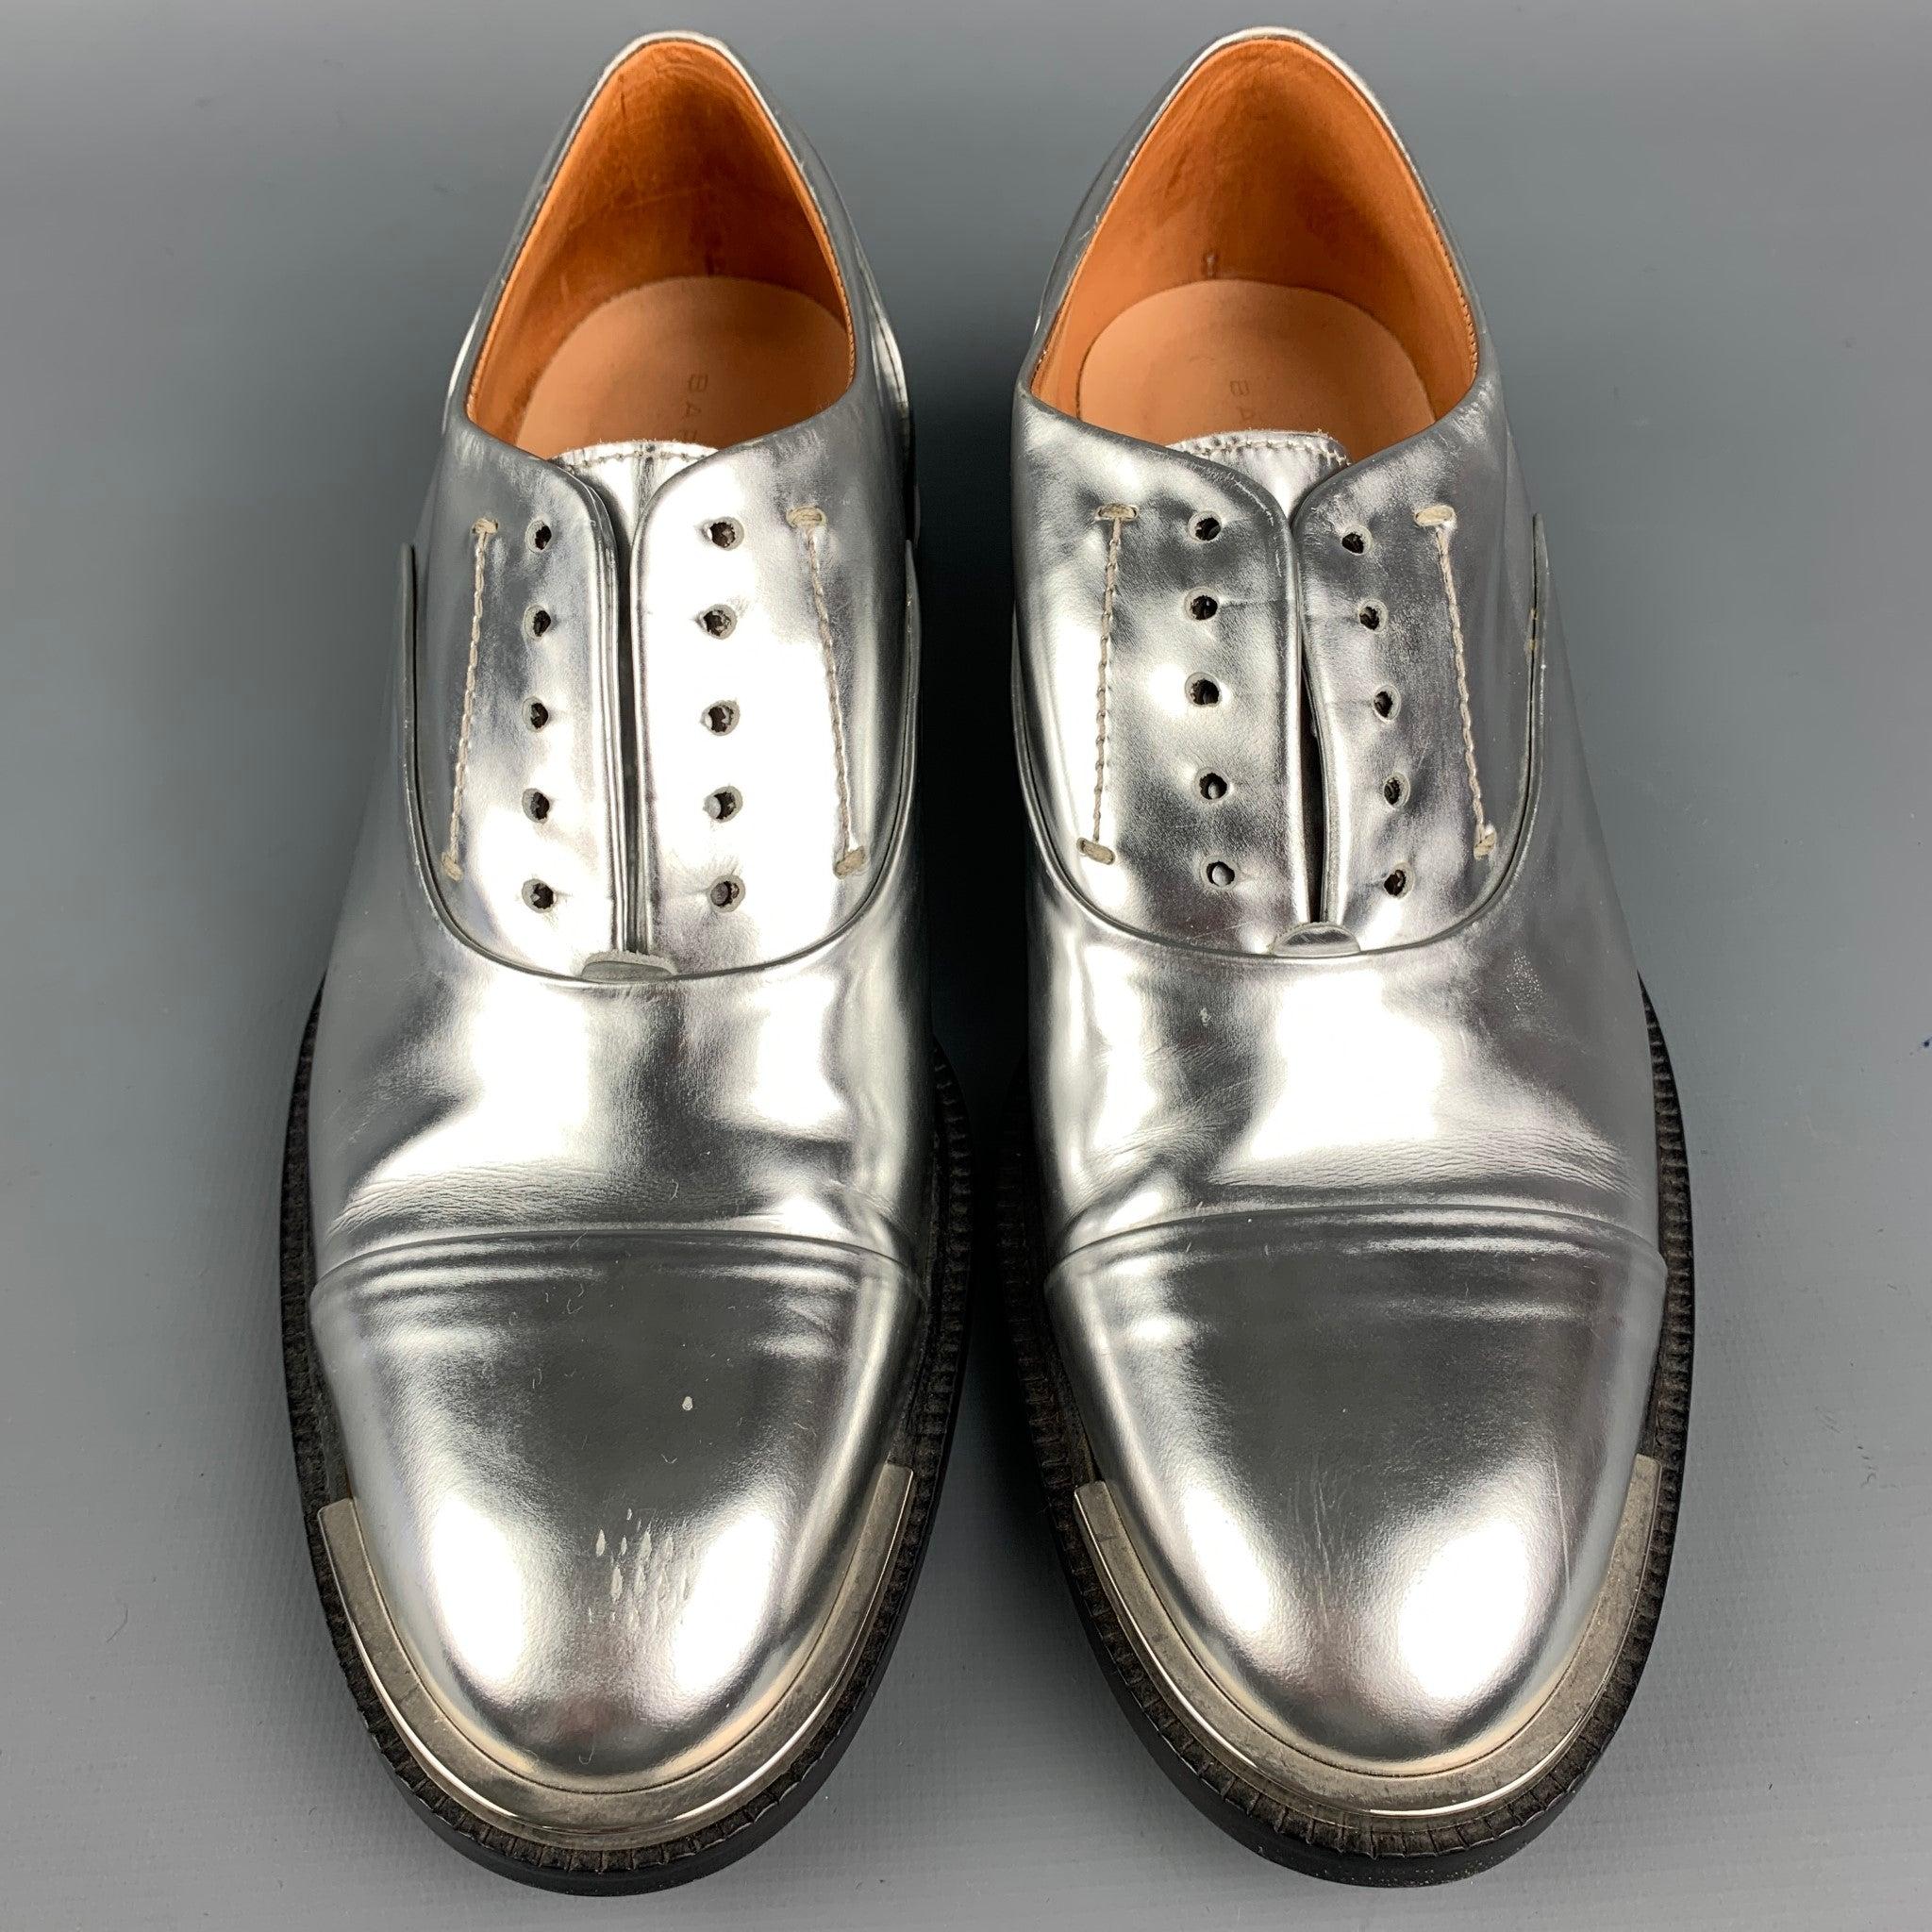 Women's BARBARA BUI Size 7 Silver Leather Metallic Patent Leather Shoes For Sale